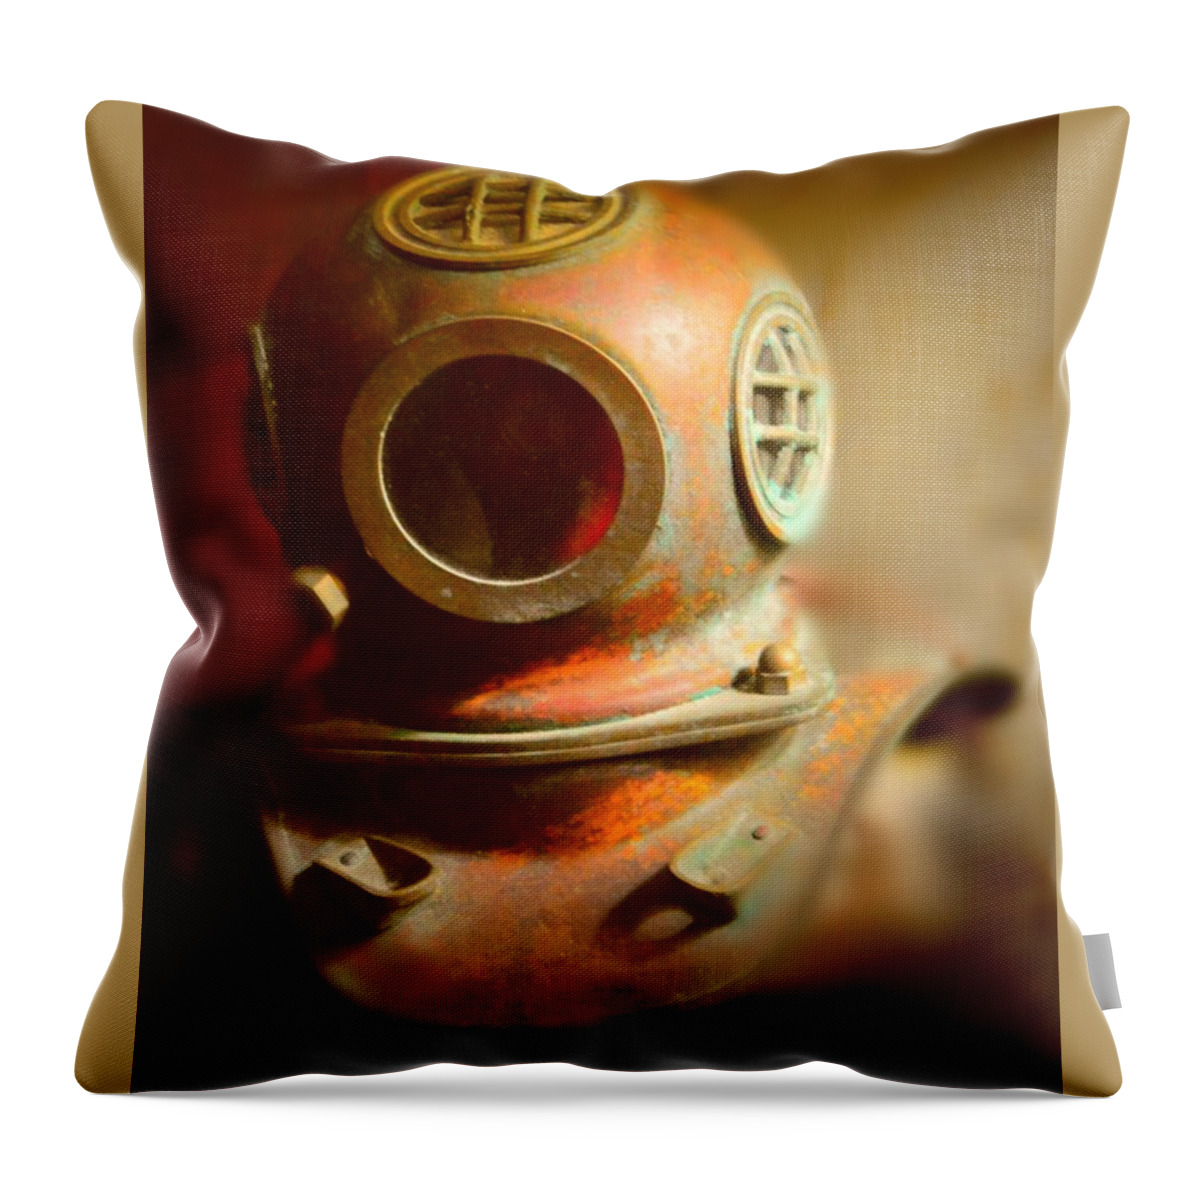 Diver Throw Pillow featuring the photograph The Retired Diver by Stacie Siemsen